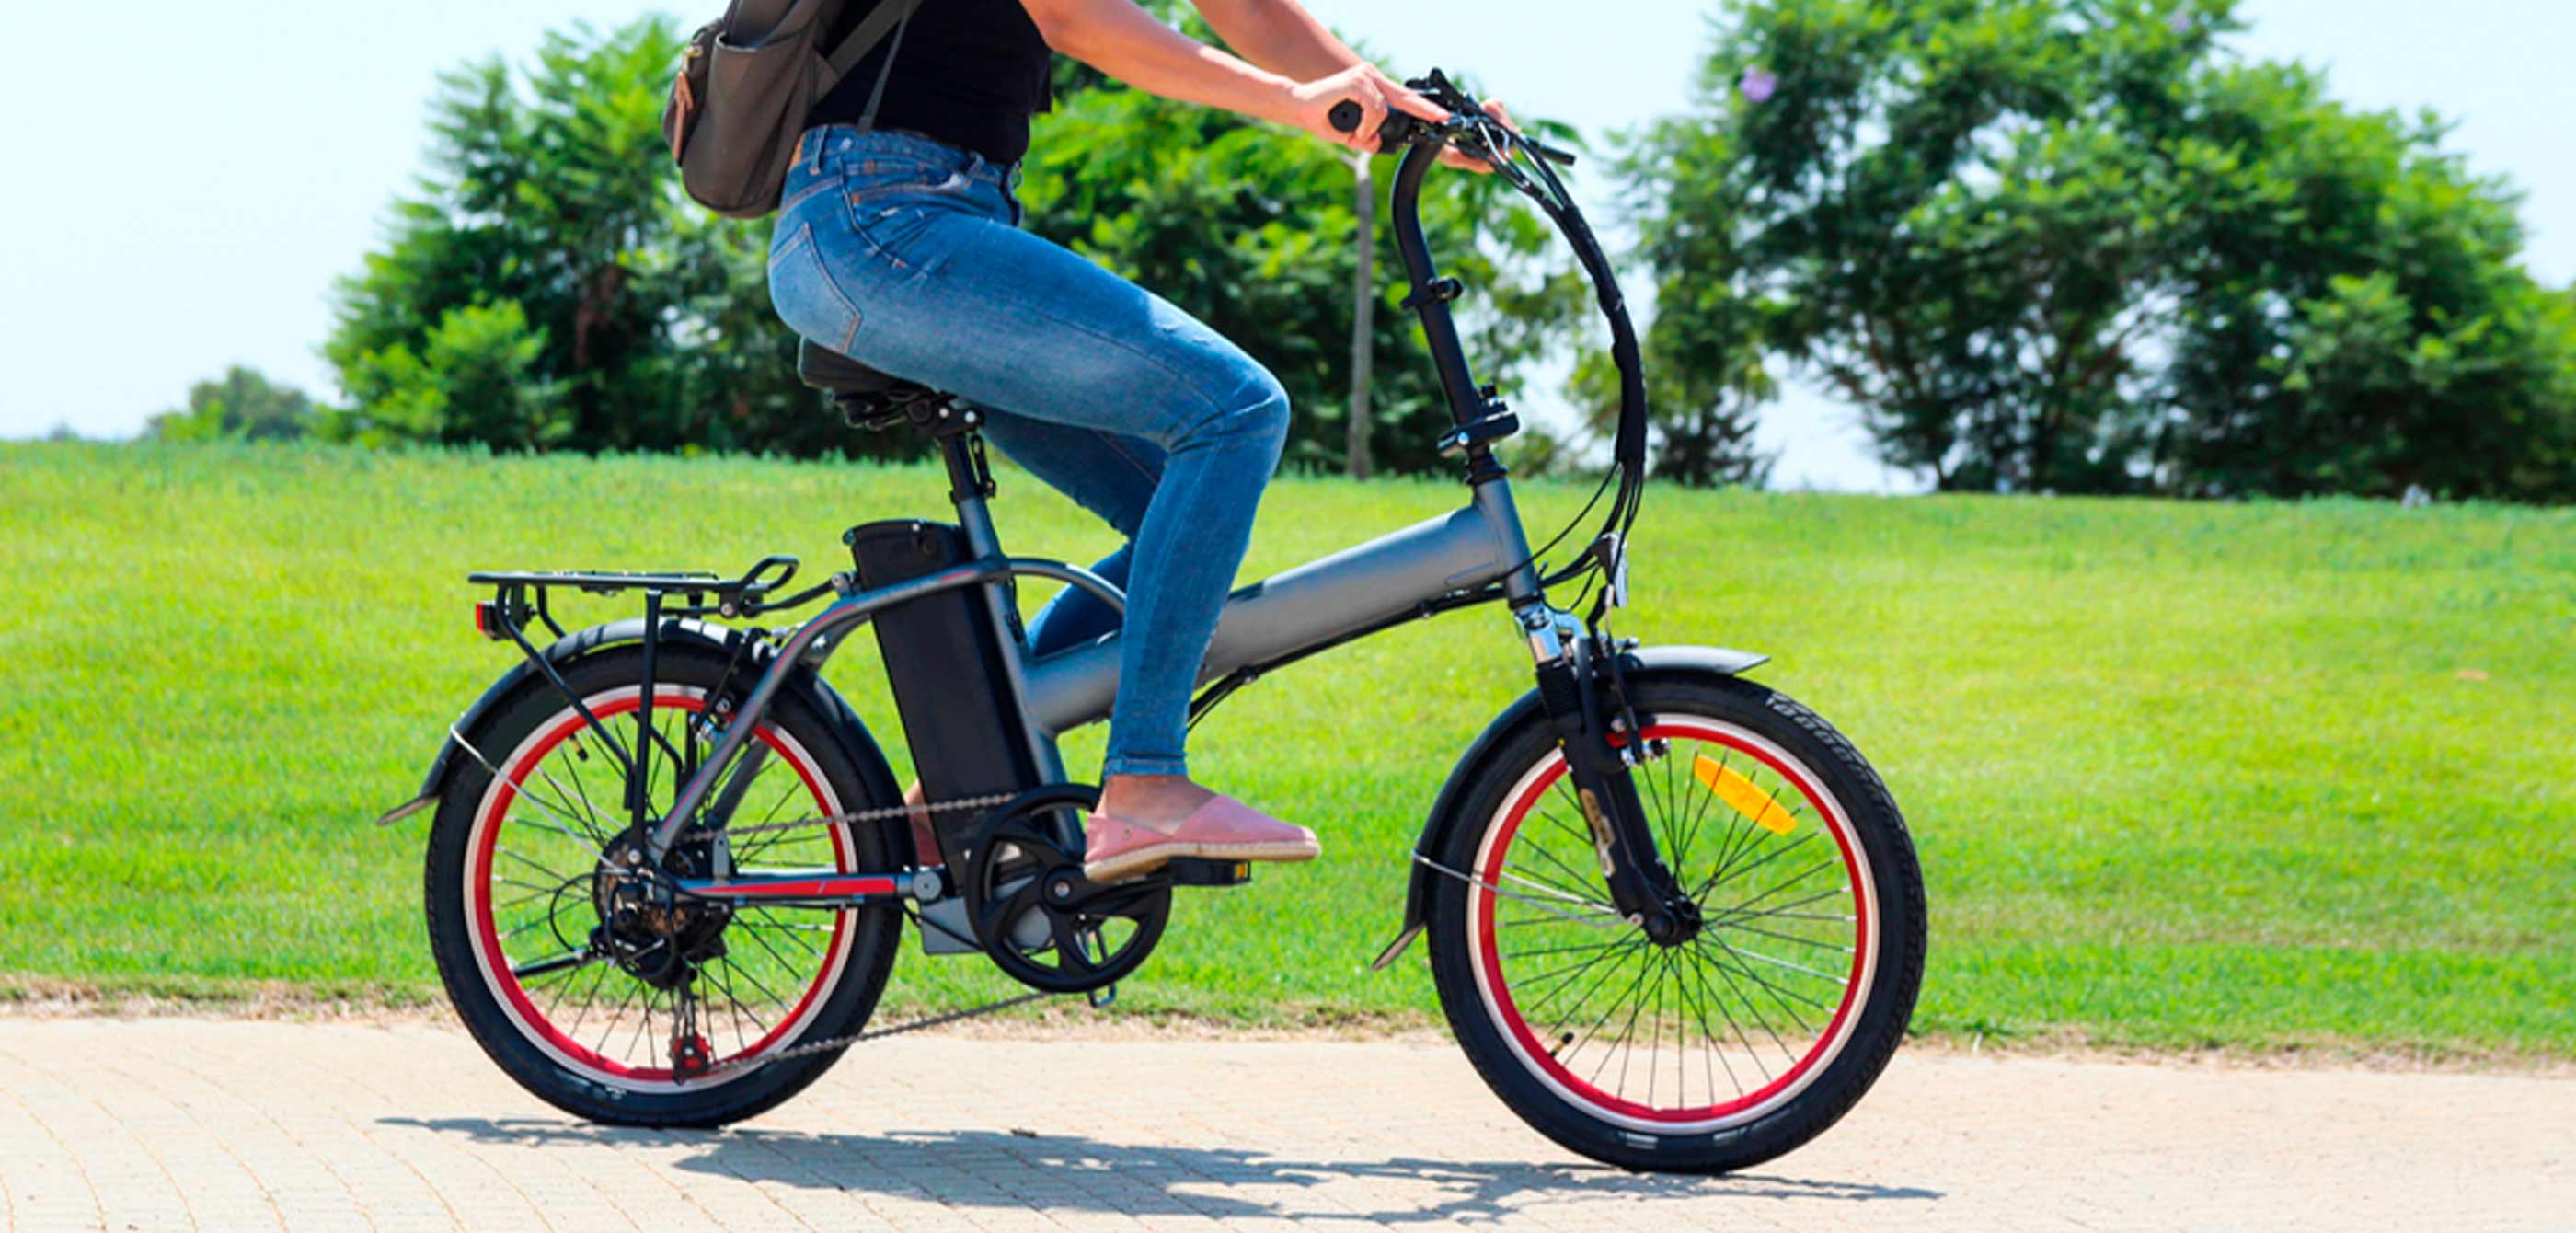 How to Ride Safely and Avoid E-Bike Accidents